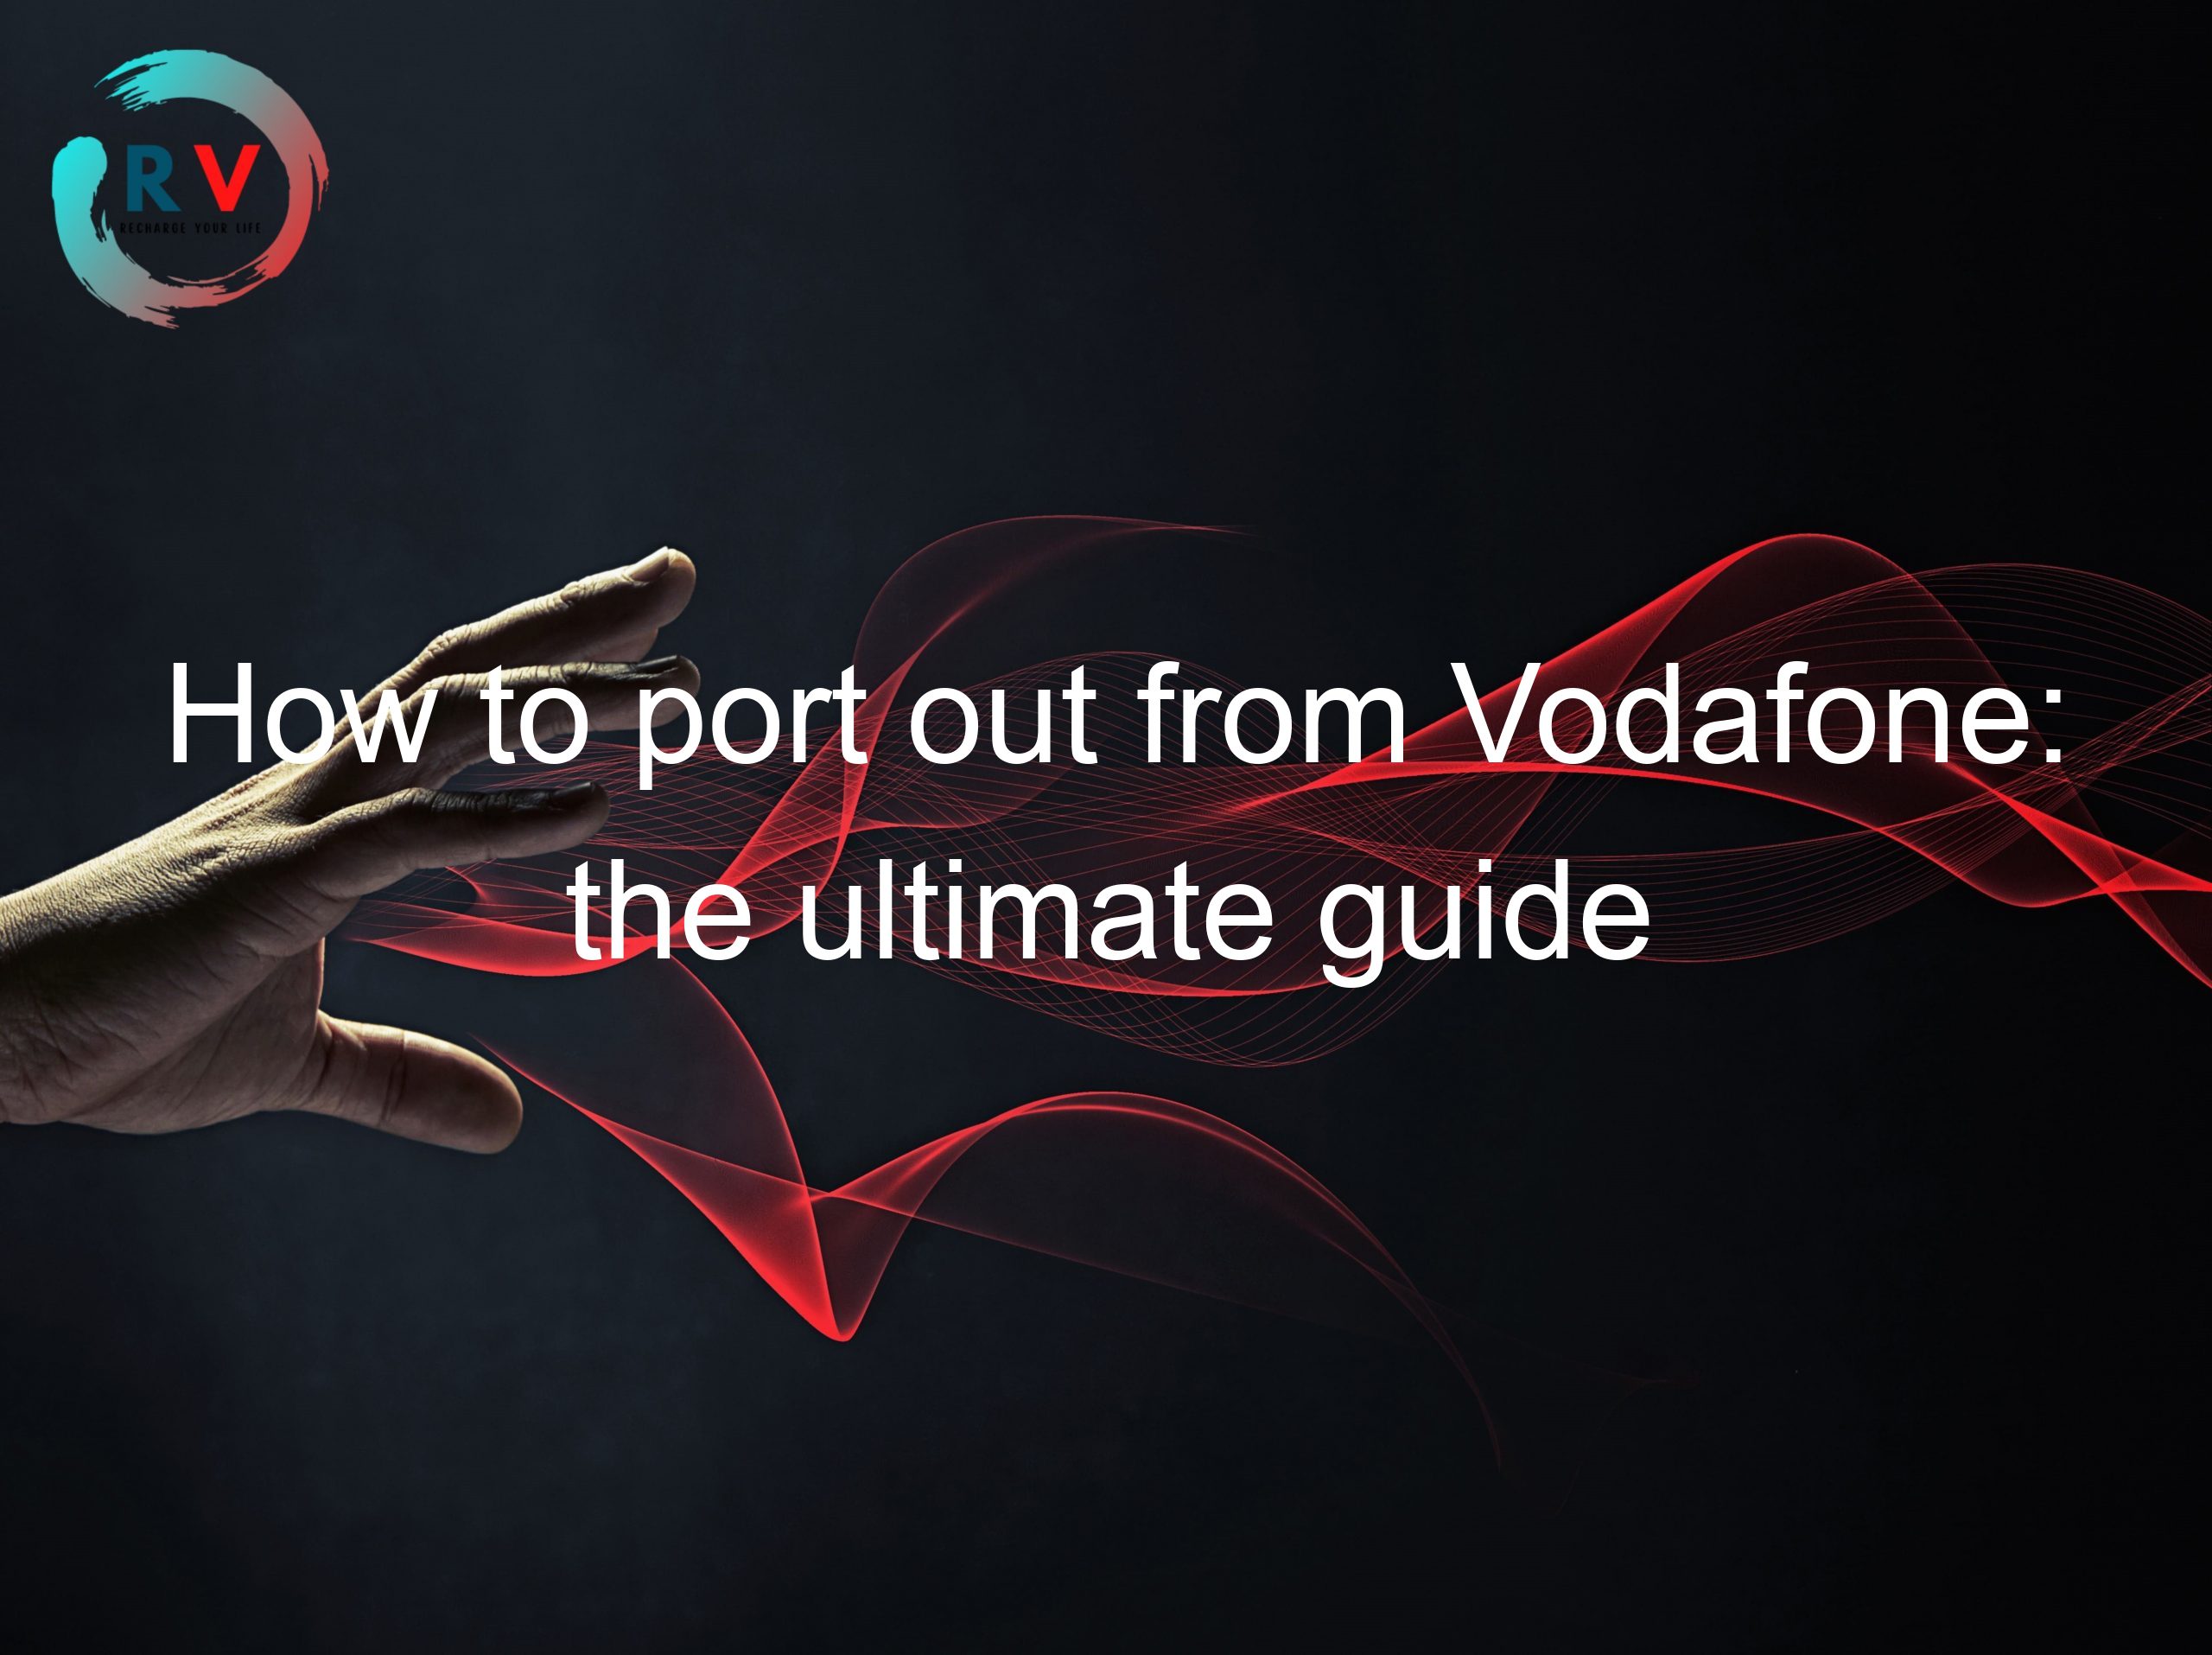 How to port out from Vodafone: the ultimate guide